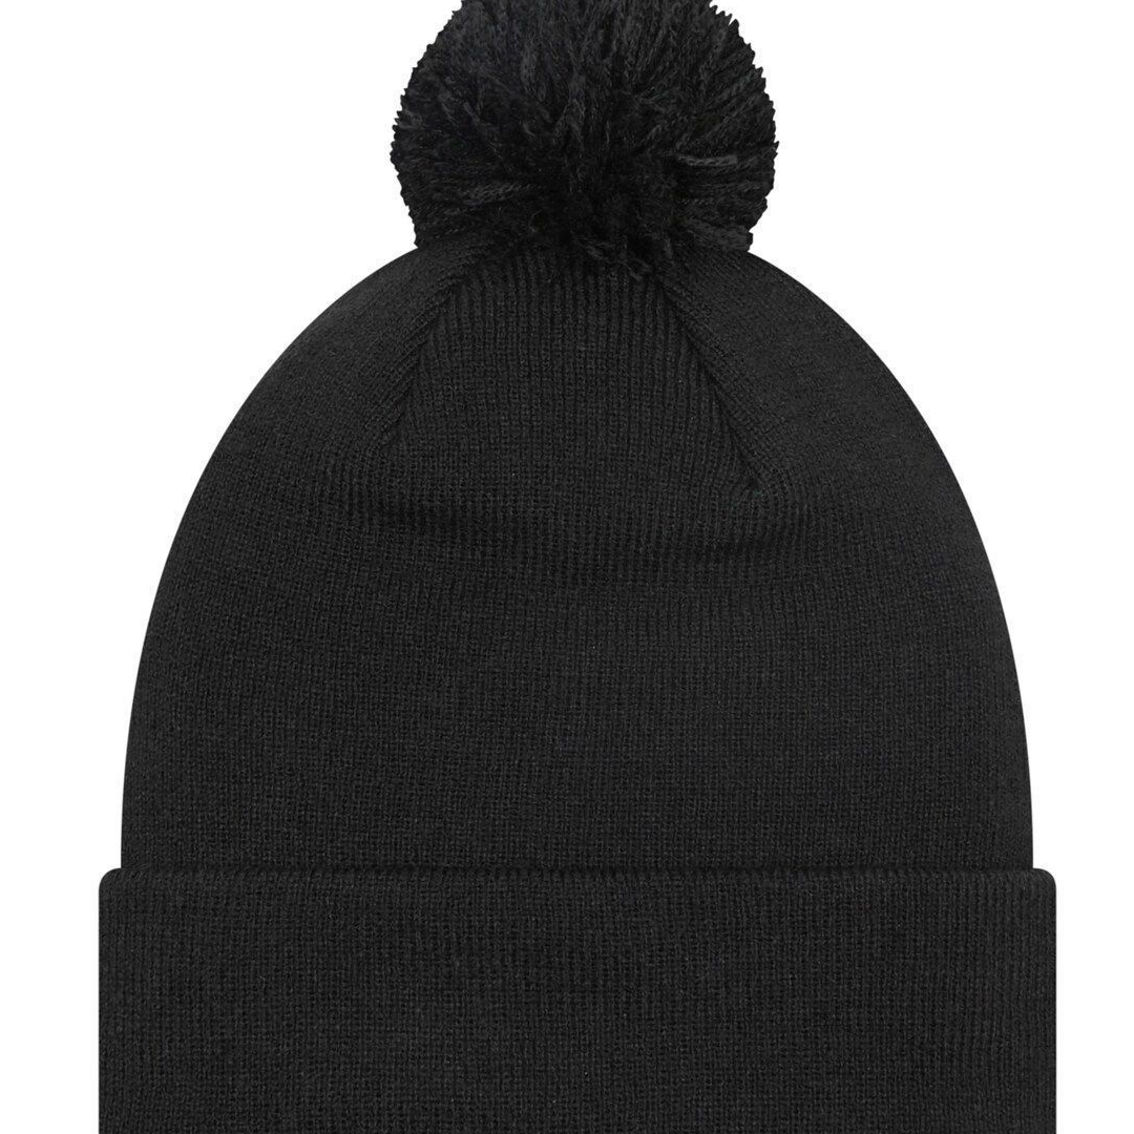 Men's New Era Black Manchester United Iridescent Cuffed Knit Hat with Pom - Image 3 of 3